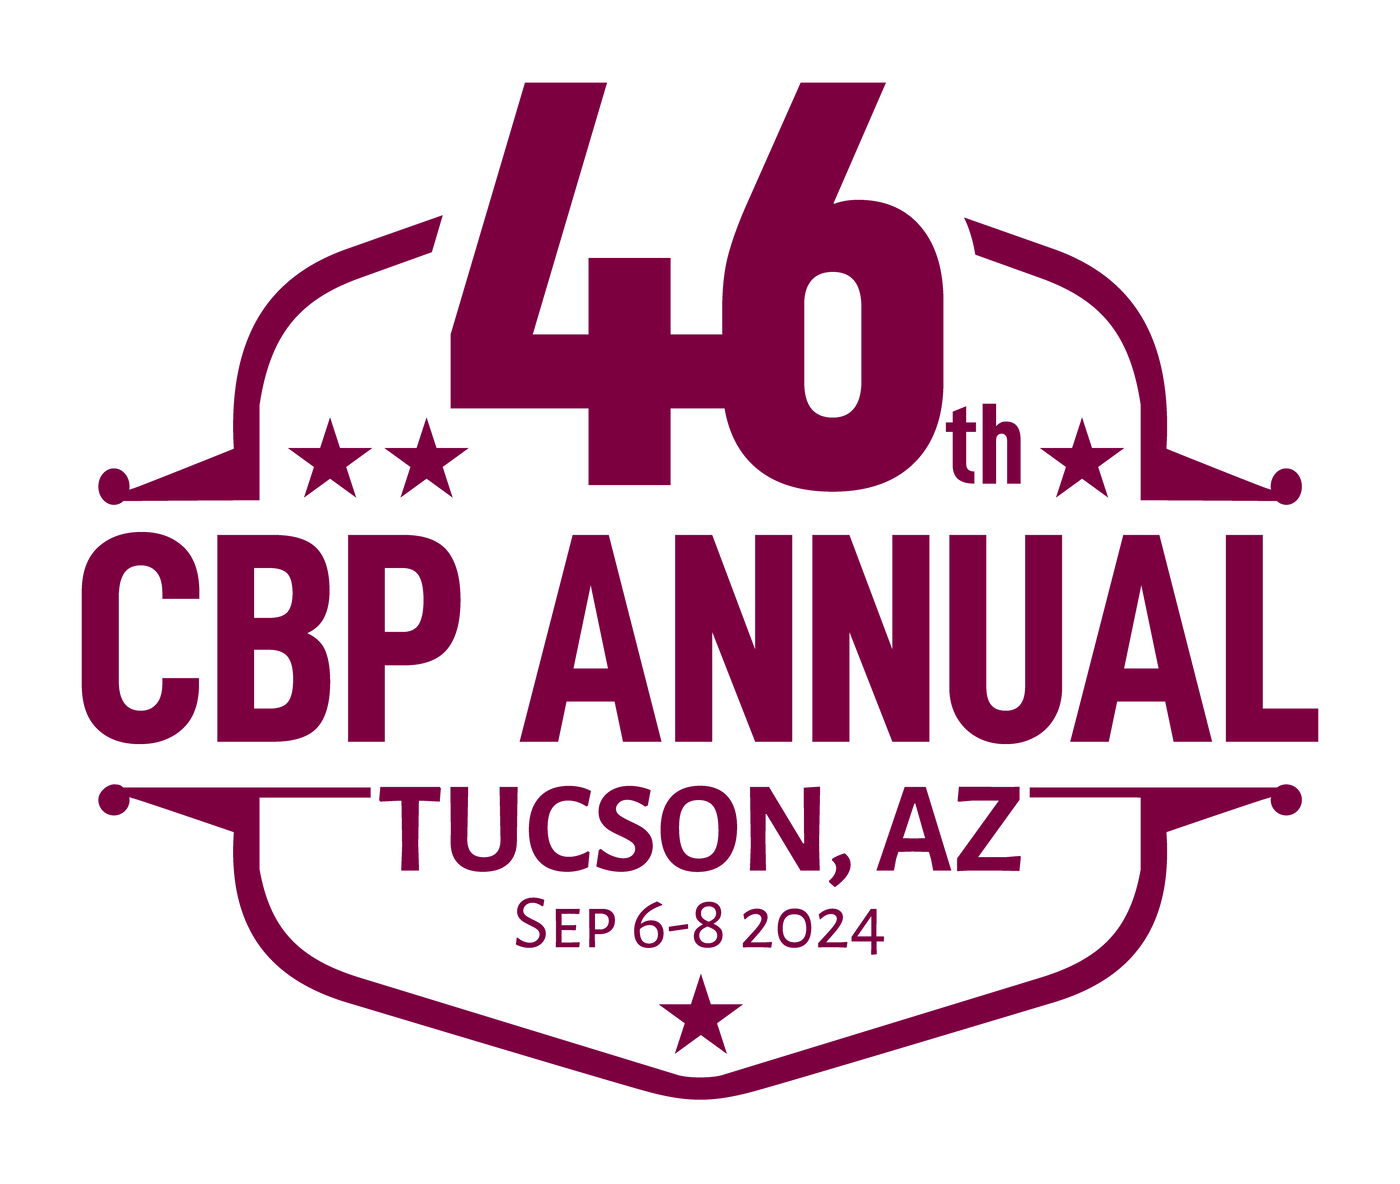 September 6 - 8, 2024: 46th CBP Annual Conference